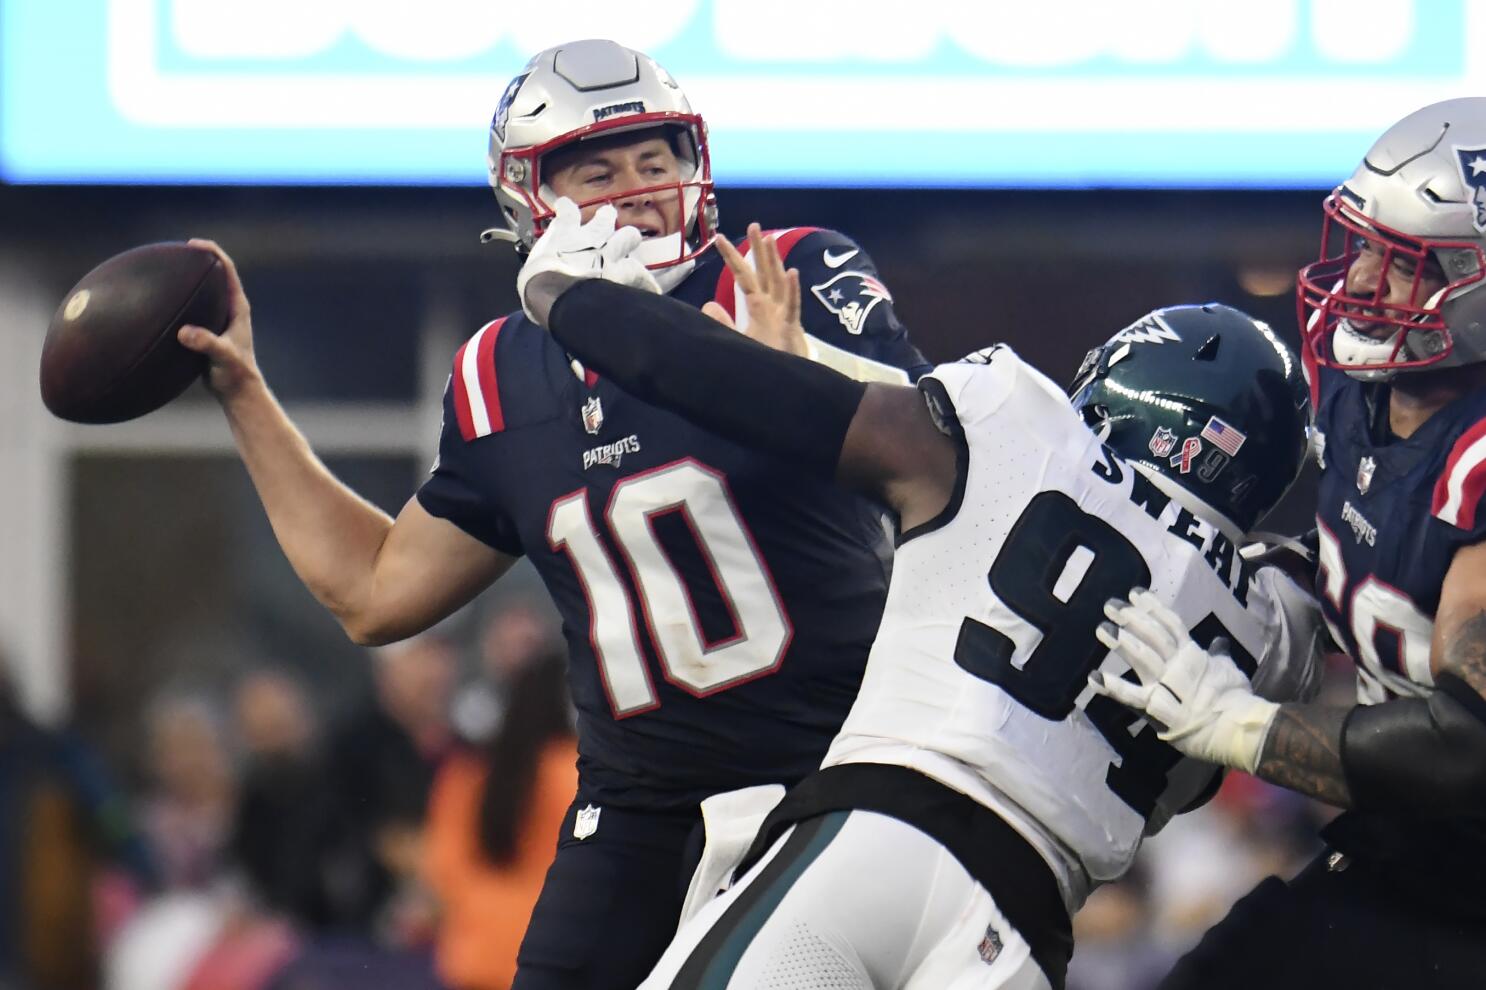 The Patriots see progress with their offense after their season-opening  loss to the Eagles